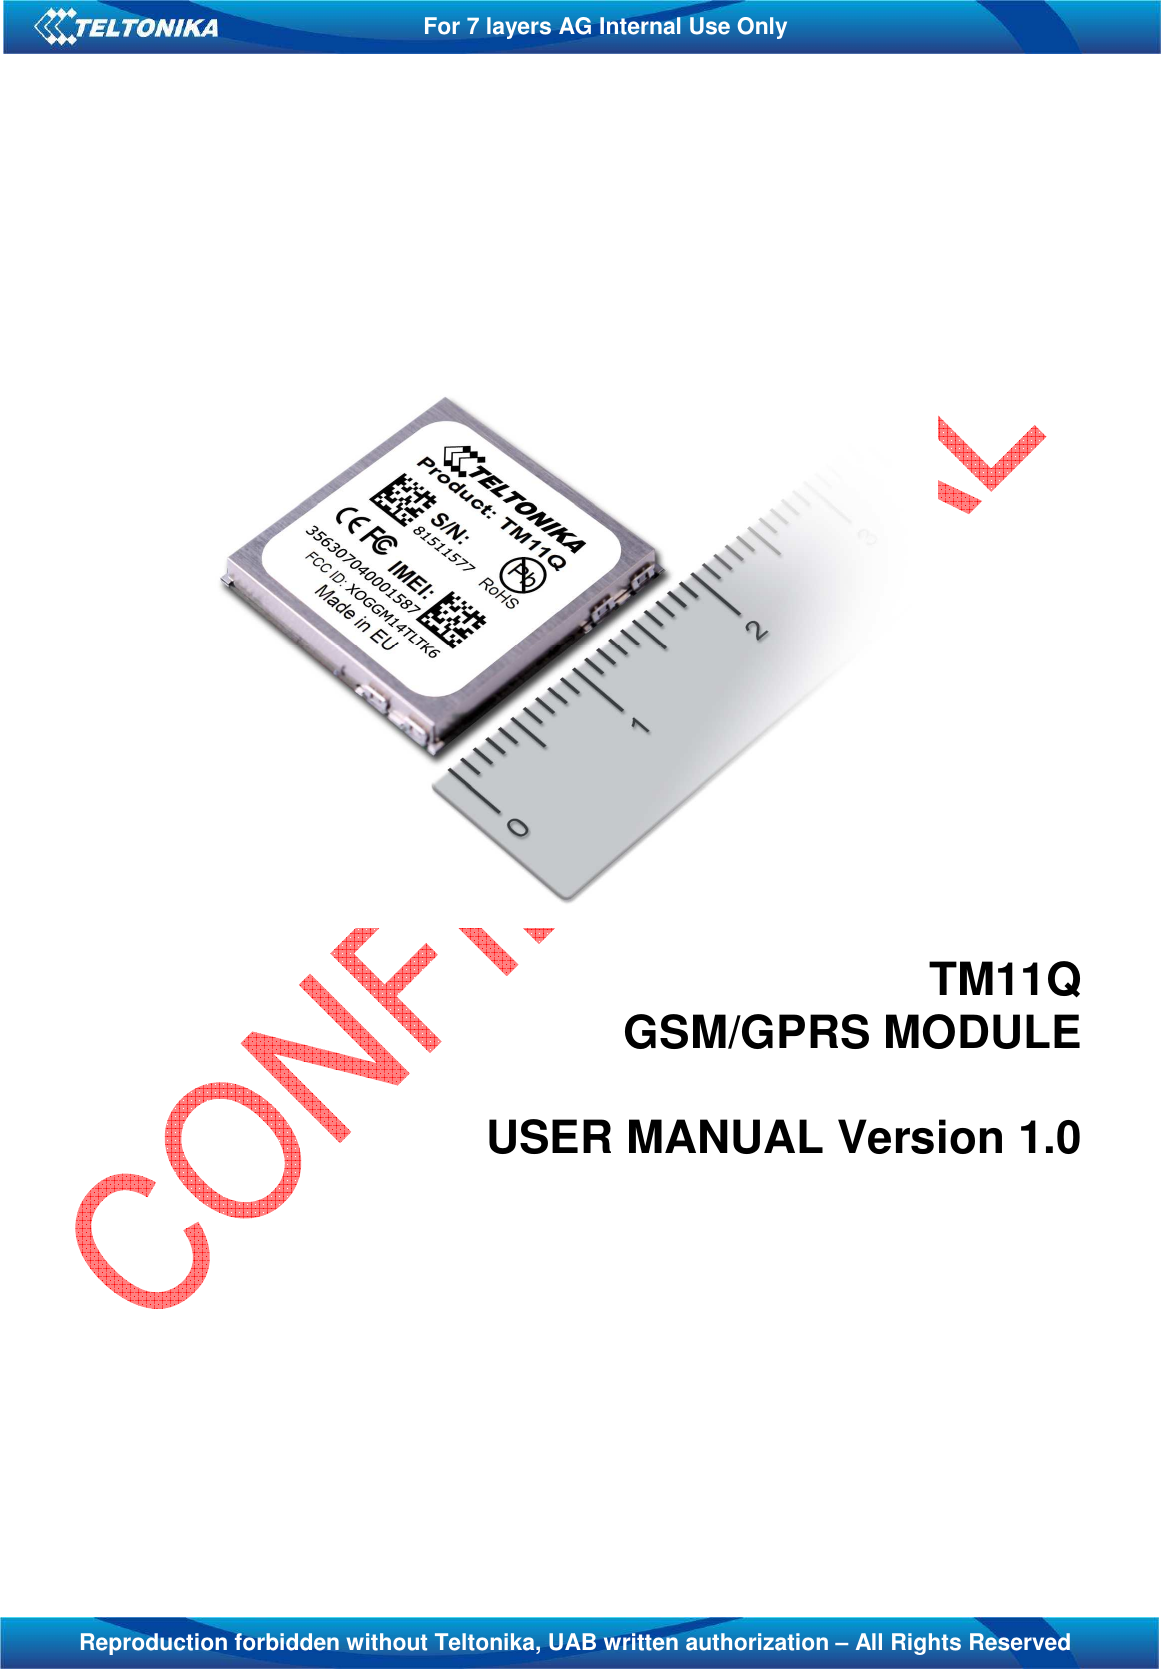   For 7 layers AG Internal Use Only  Reproduction forbidden without Teltonika, UAB written authorization – All Rights Reserved           TM11Q GSM/GPRS MODULE  USER MANUAL Version 1.0  